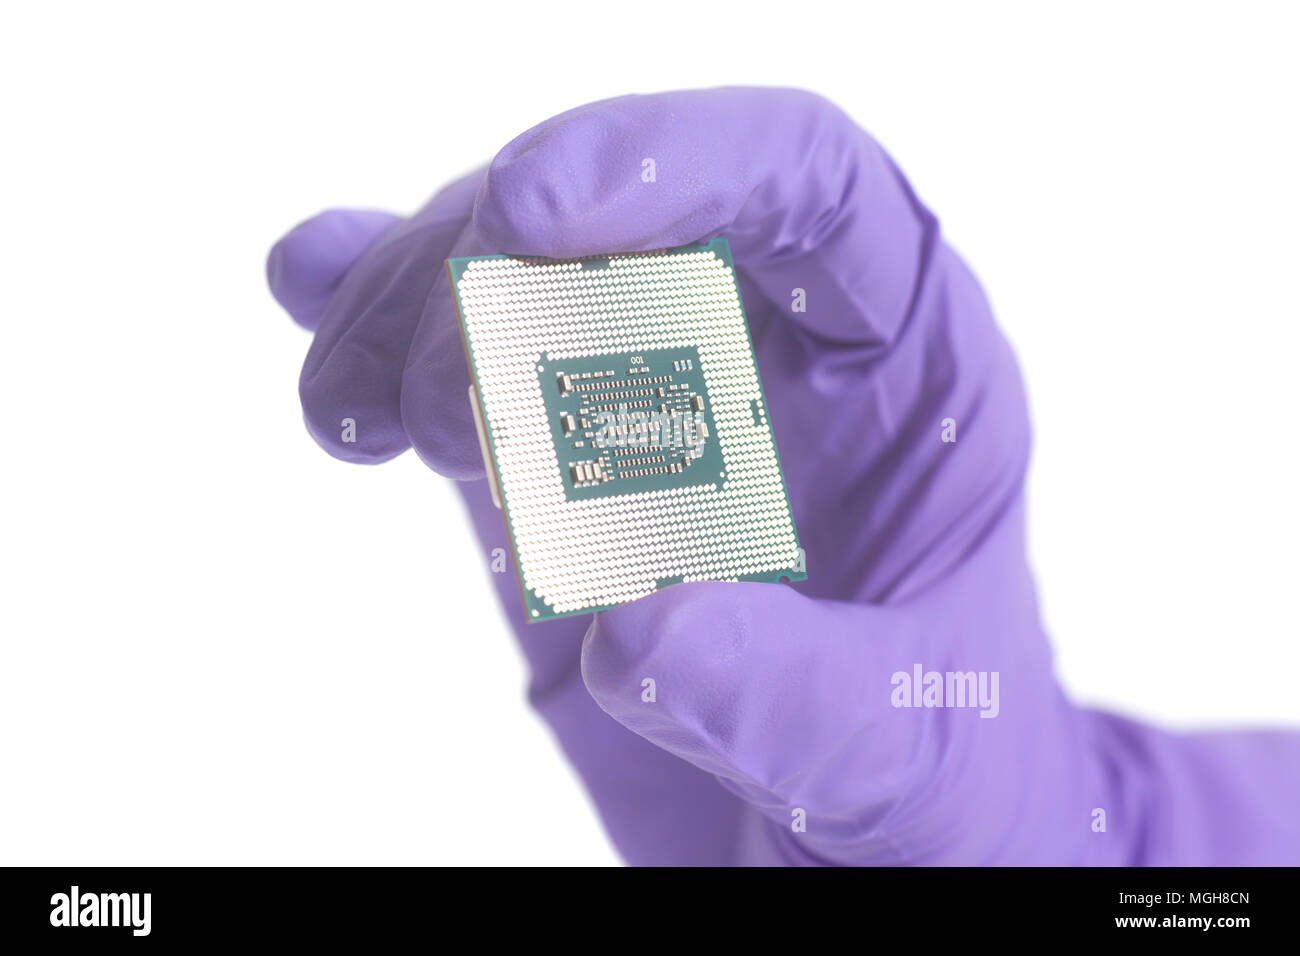 Hand in purple glove holding a CPU computer processor microchip isolated on a white background Stock Photo